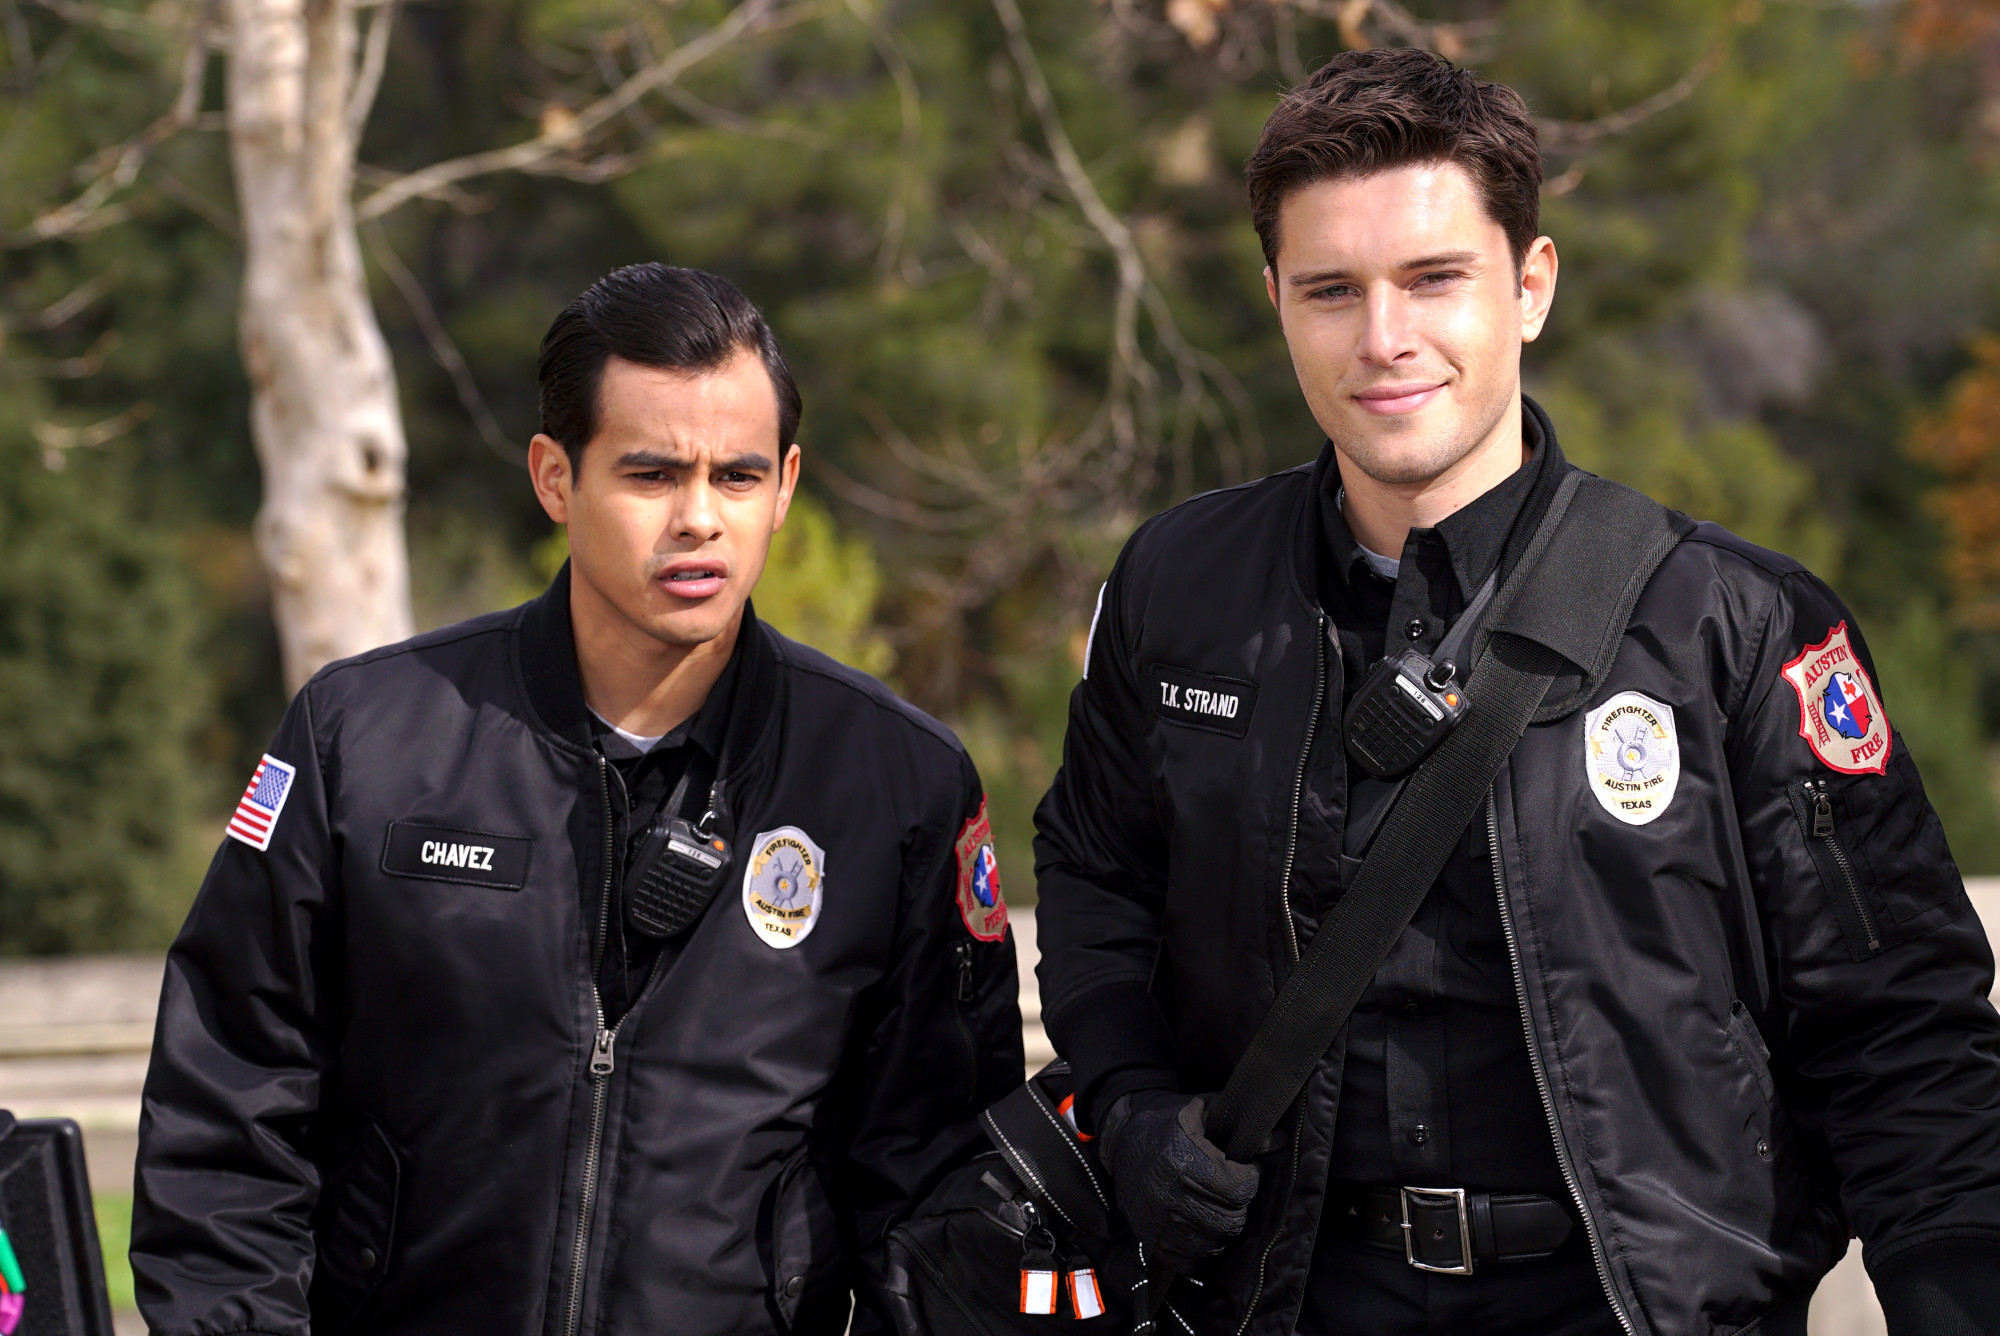 9-1-1: LONE STAR: L-R: Julian Works and Ronen Rubinstein in the “Friends Like These” episode of 9-1-1: LONE STAR airing Monday, Feb. 17 (8:00-9:01 PM ET/PT) on FOX. ©2020 Fox Media LLC. CR: Kevin Estrada/FOX.